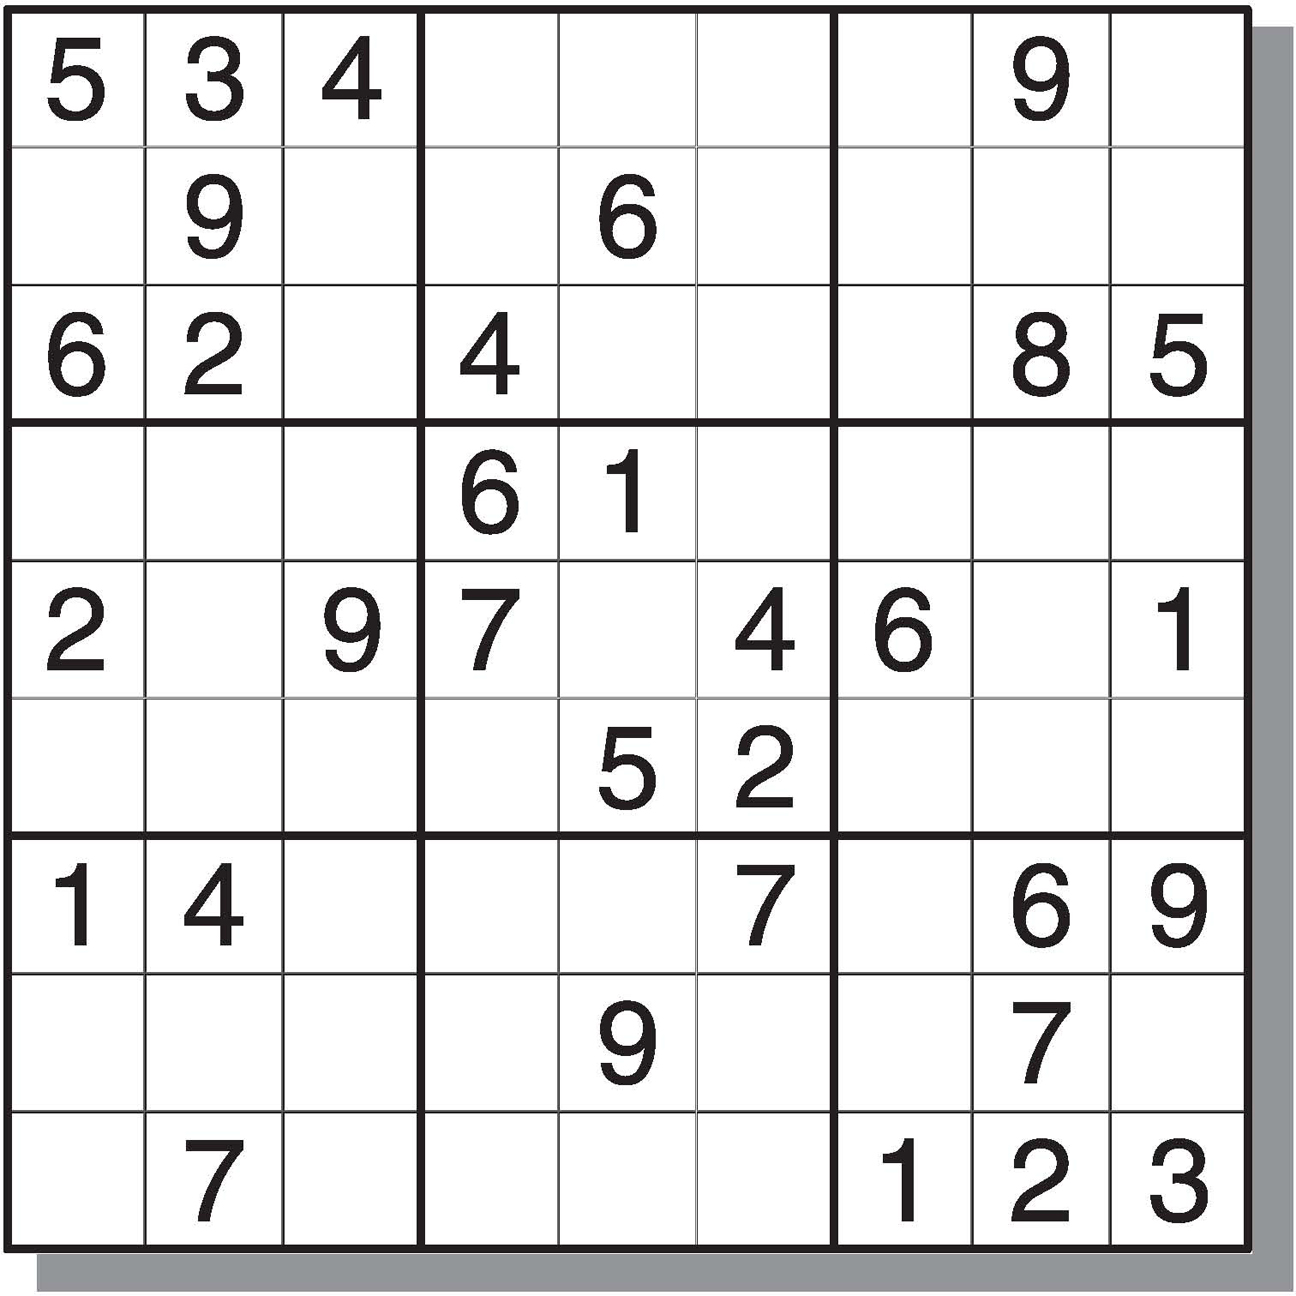 8-best-images-of-printable-sudoku-with-answers-free-medium-printable